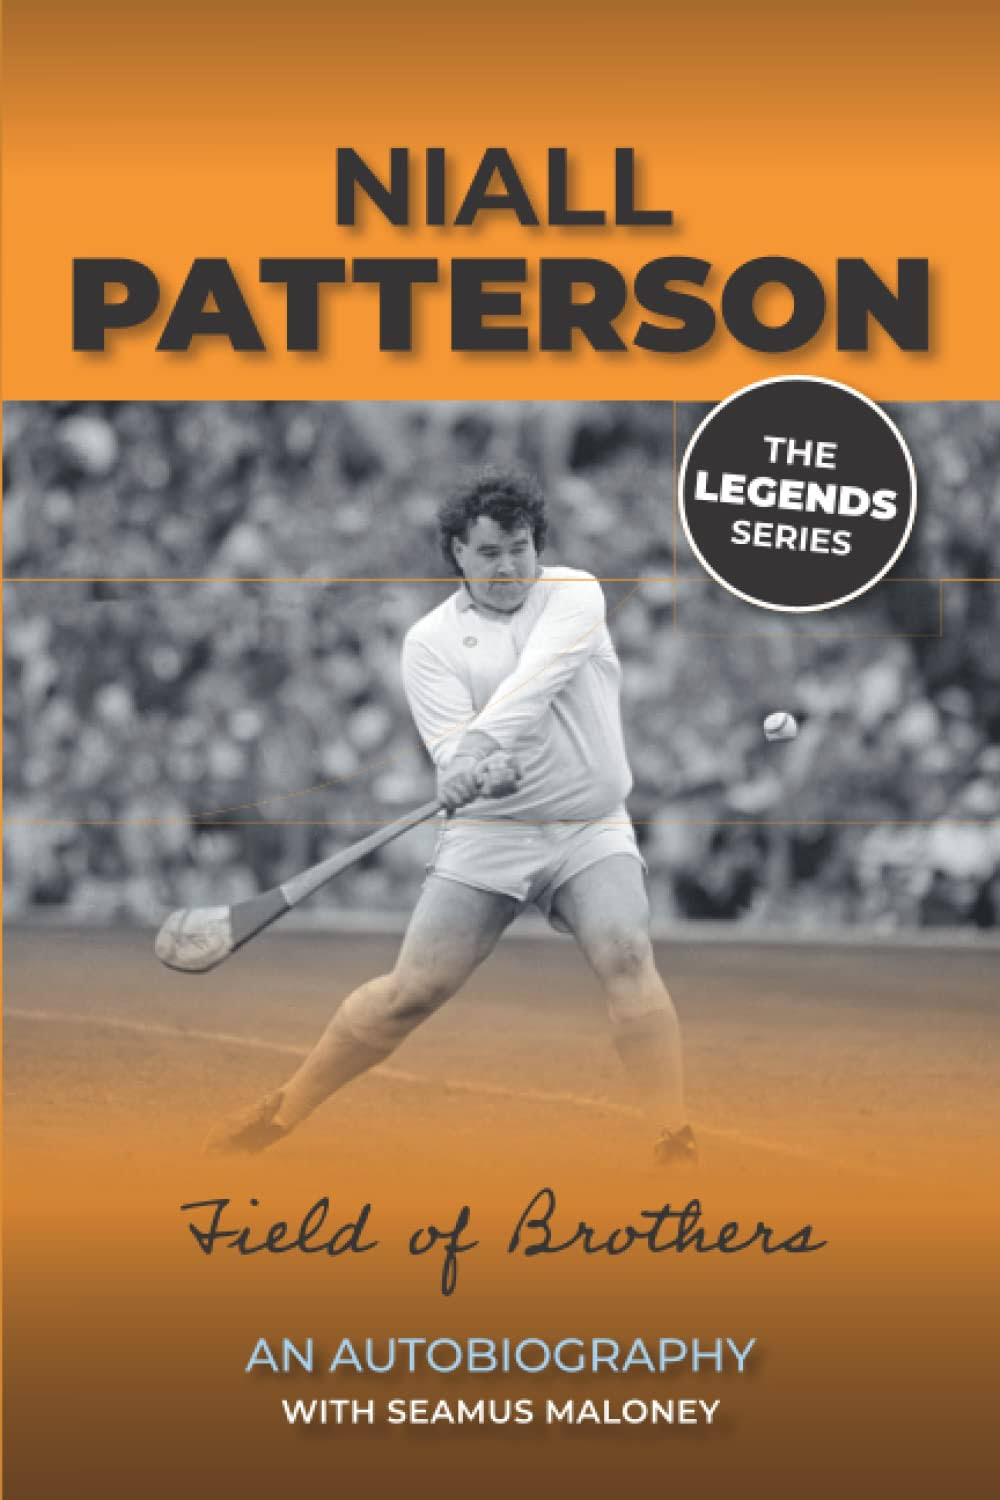 Niall Patterson: An Autobiography (Paperback)